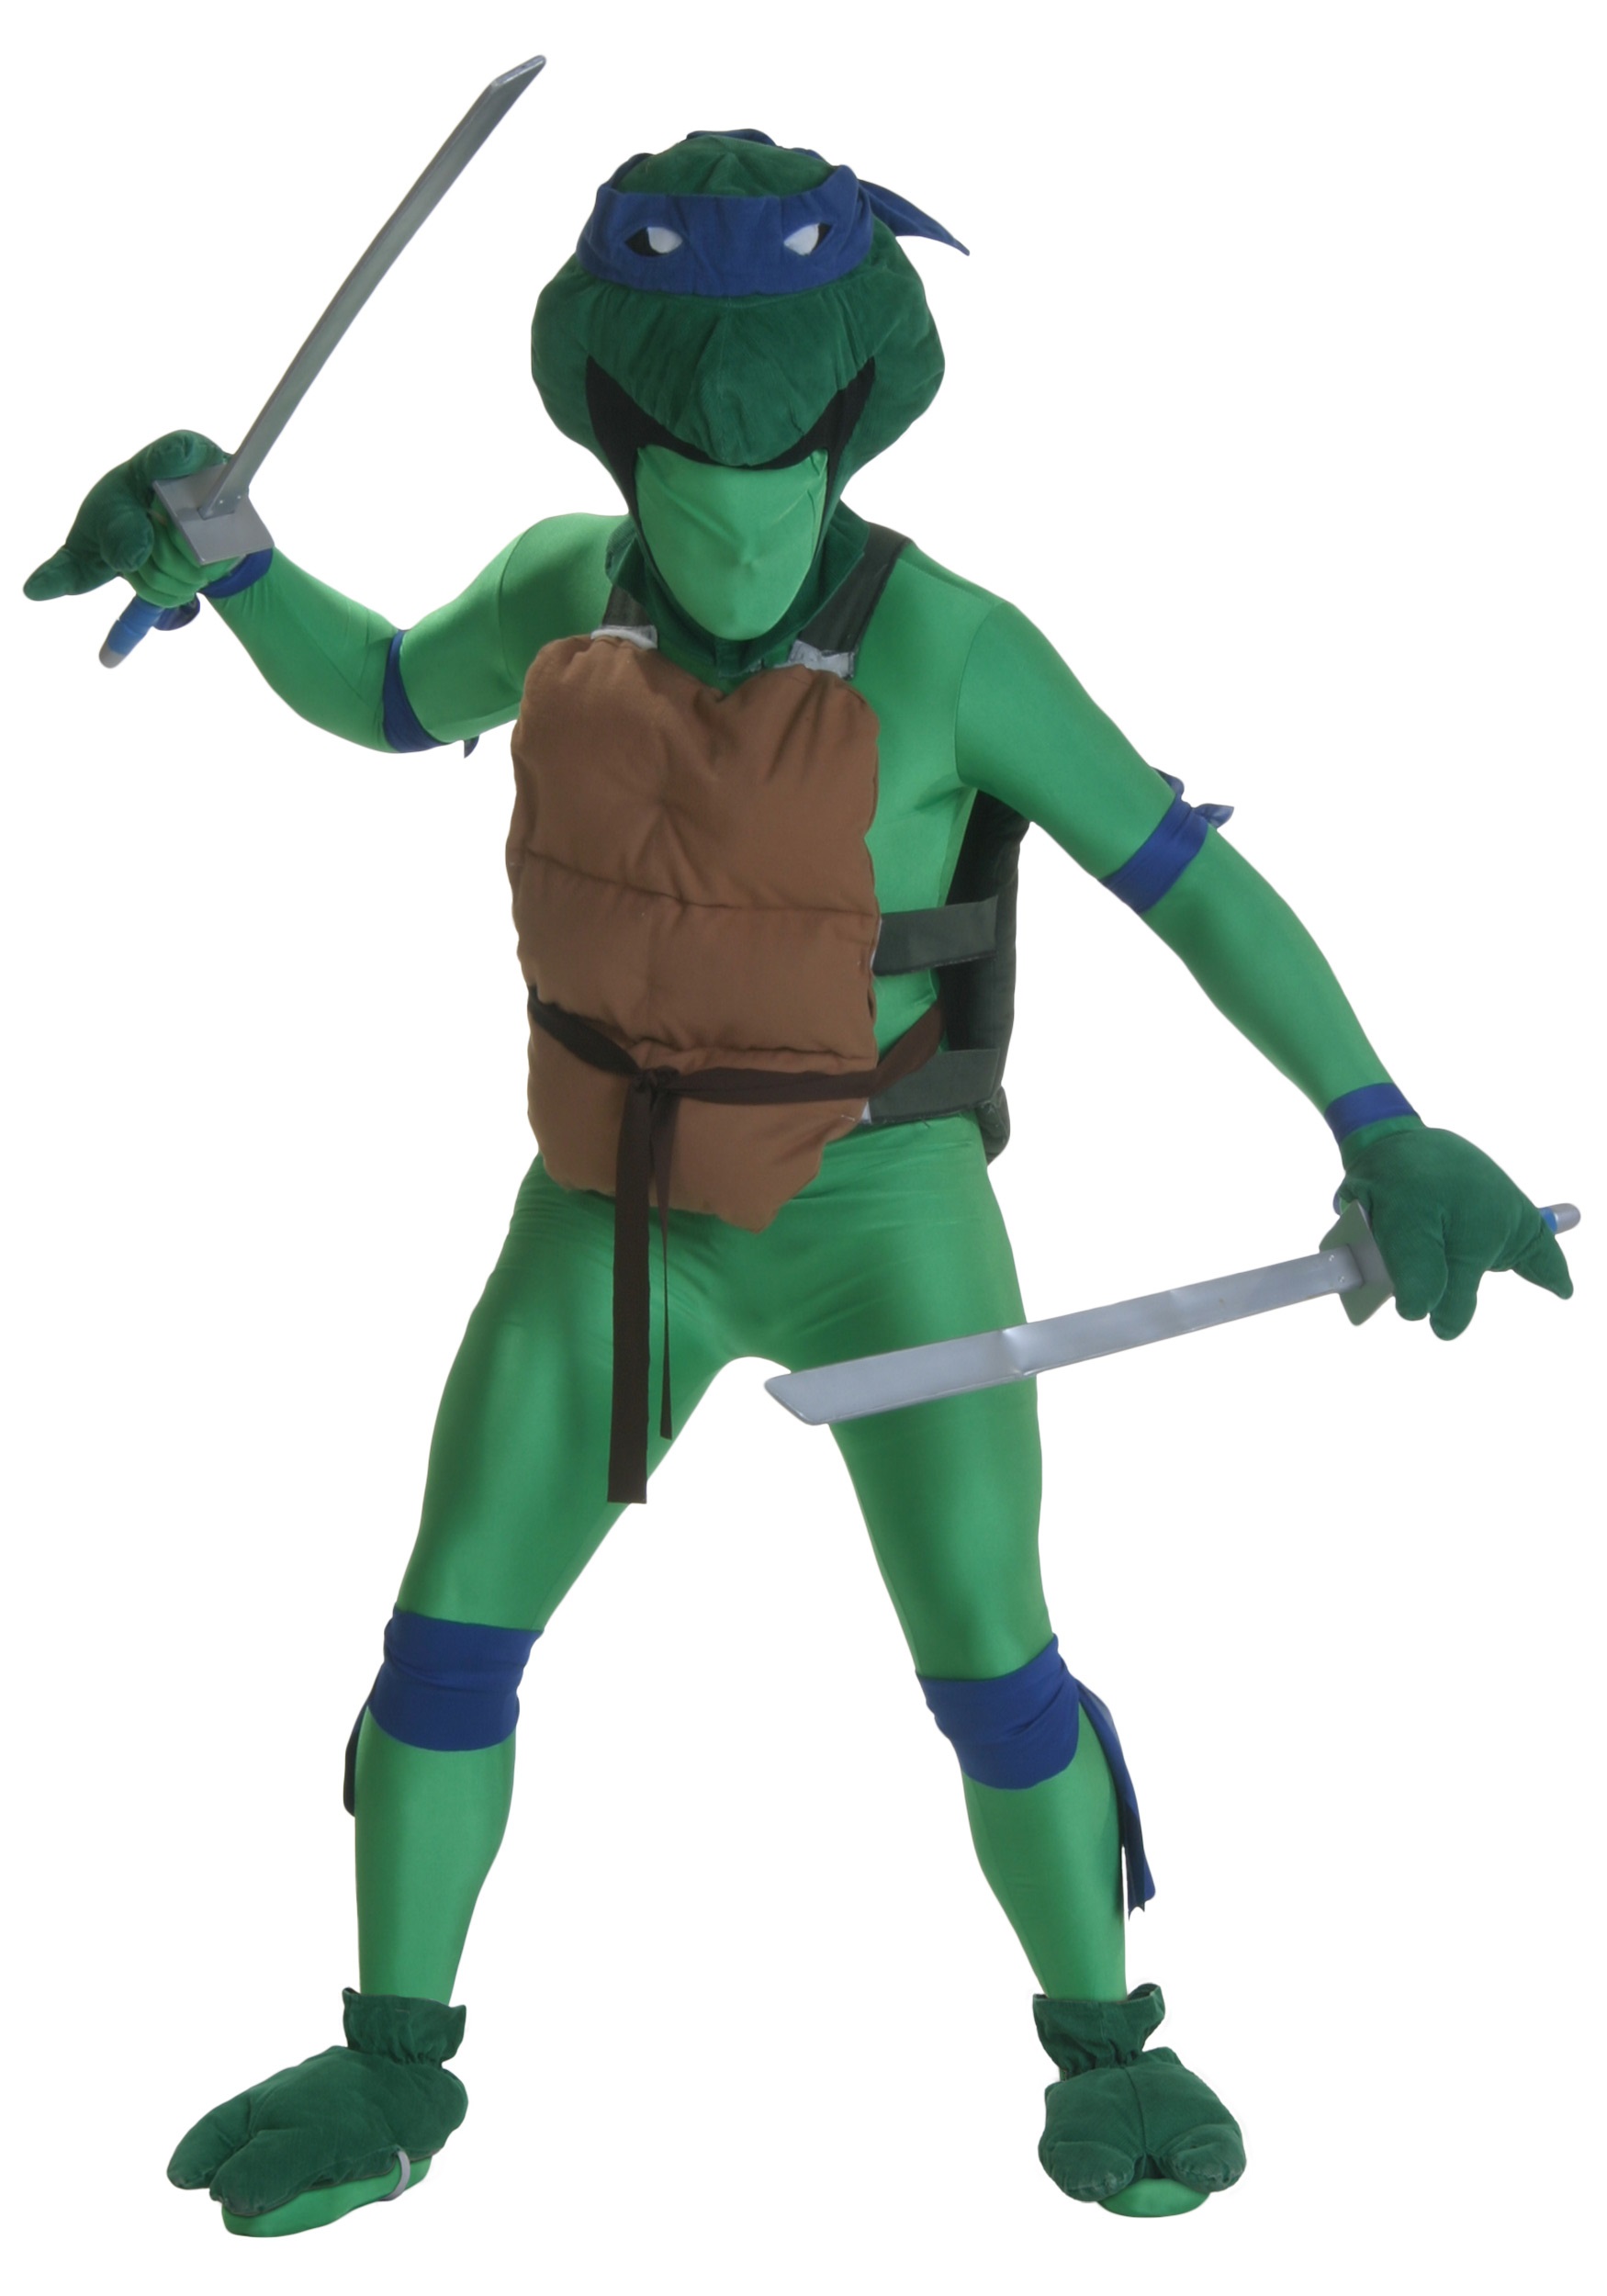 https://images.costumesgalore.net/products/321/1-1/blue-fighting-turtles-costume.jpg